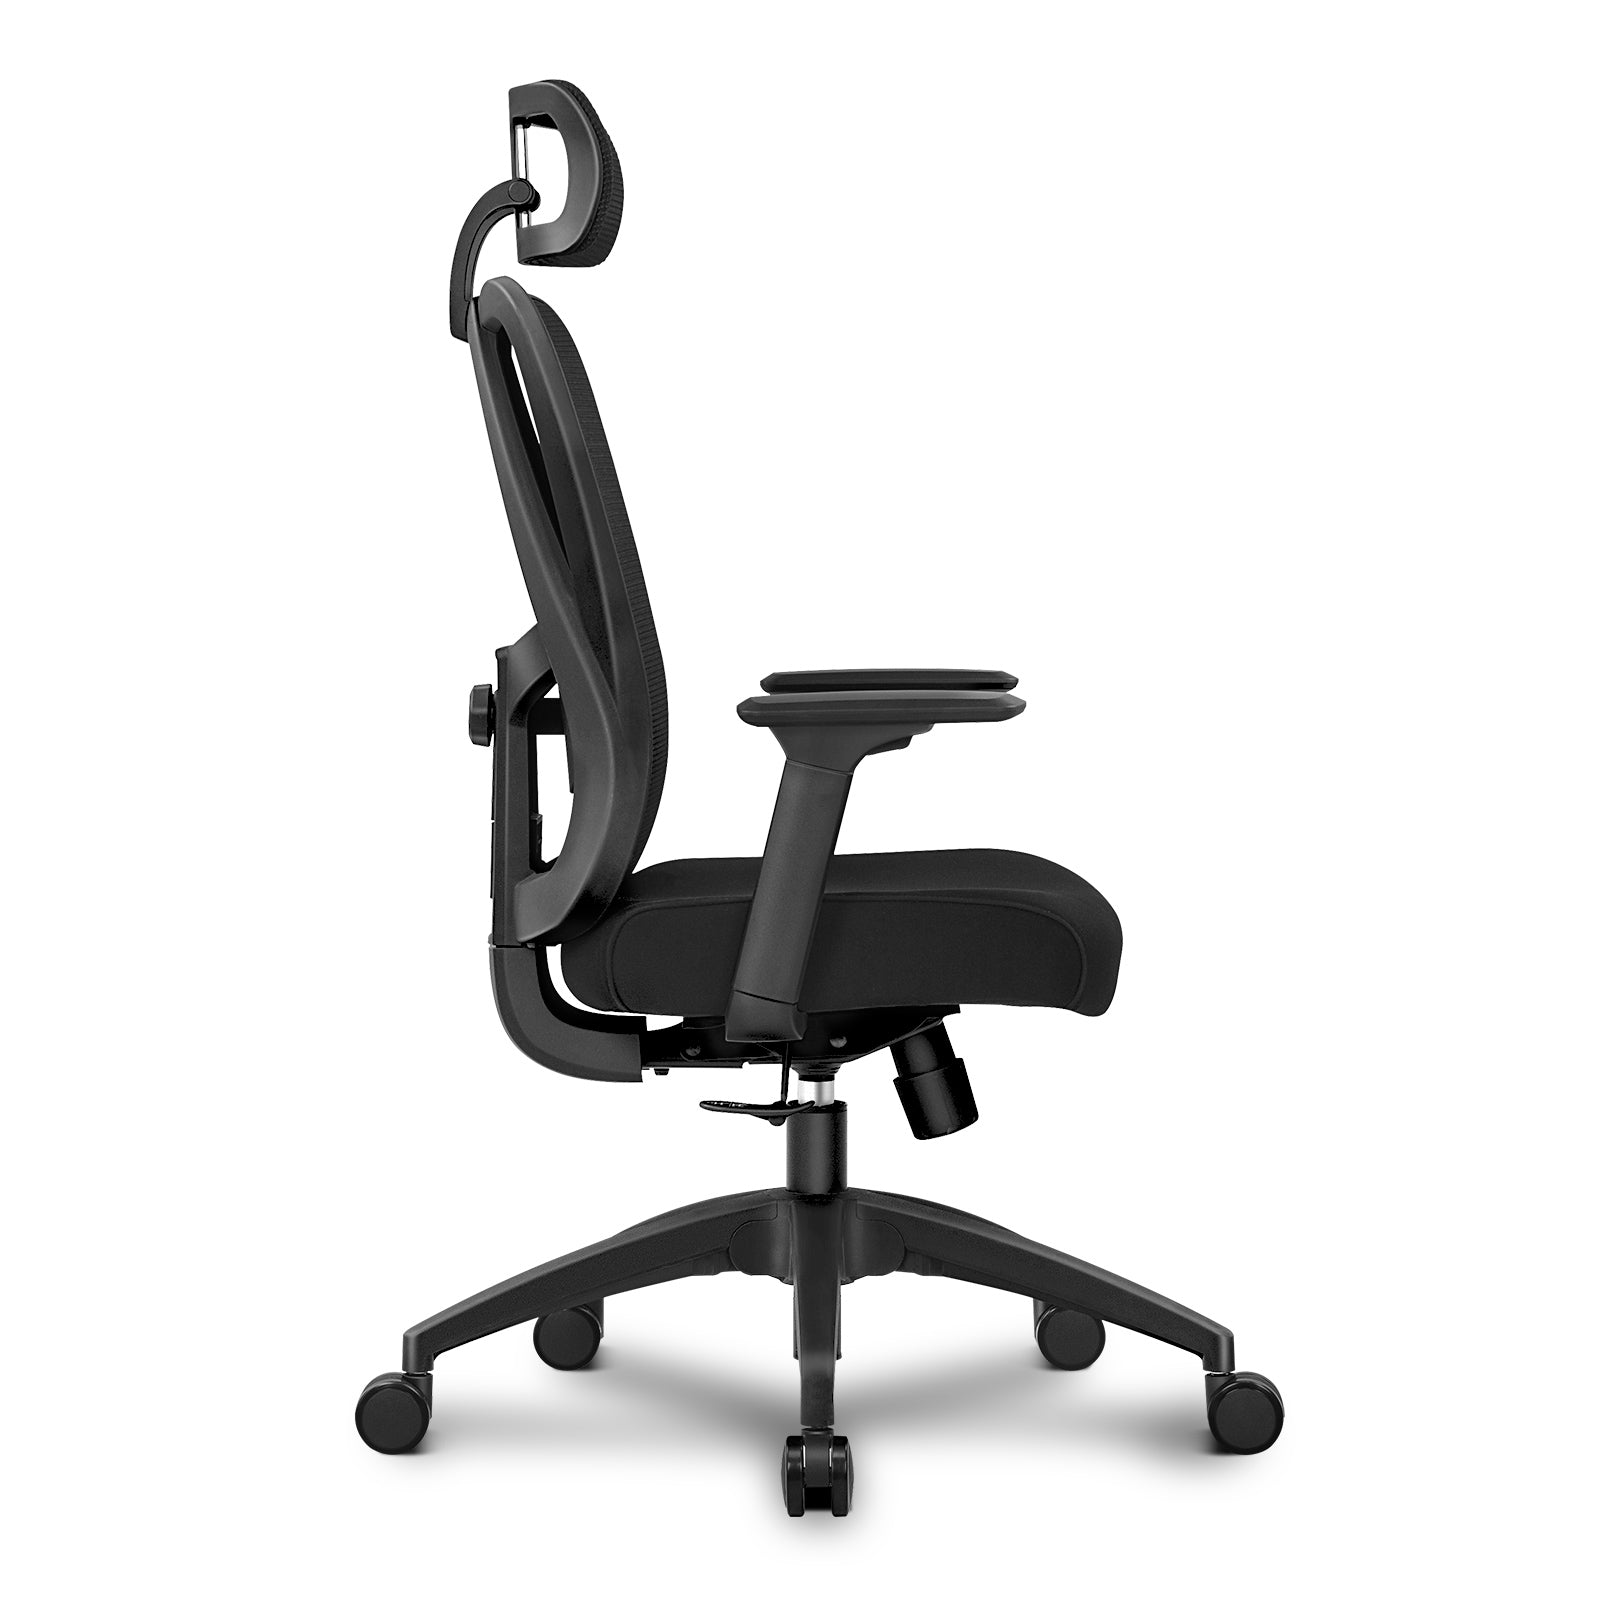 Ergonomic Black Mesh High Back Office Chair With Adjustable Lumbar Support 18HT